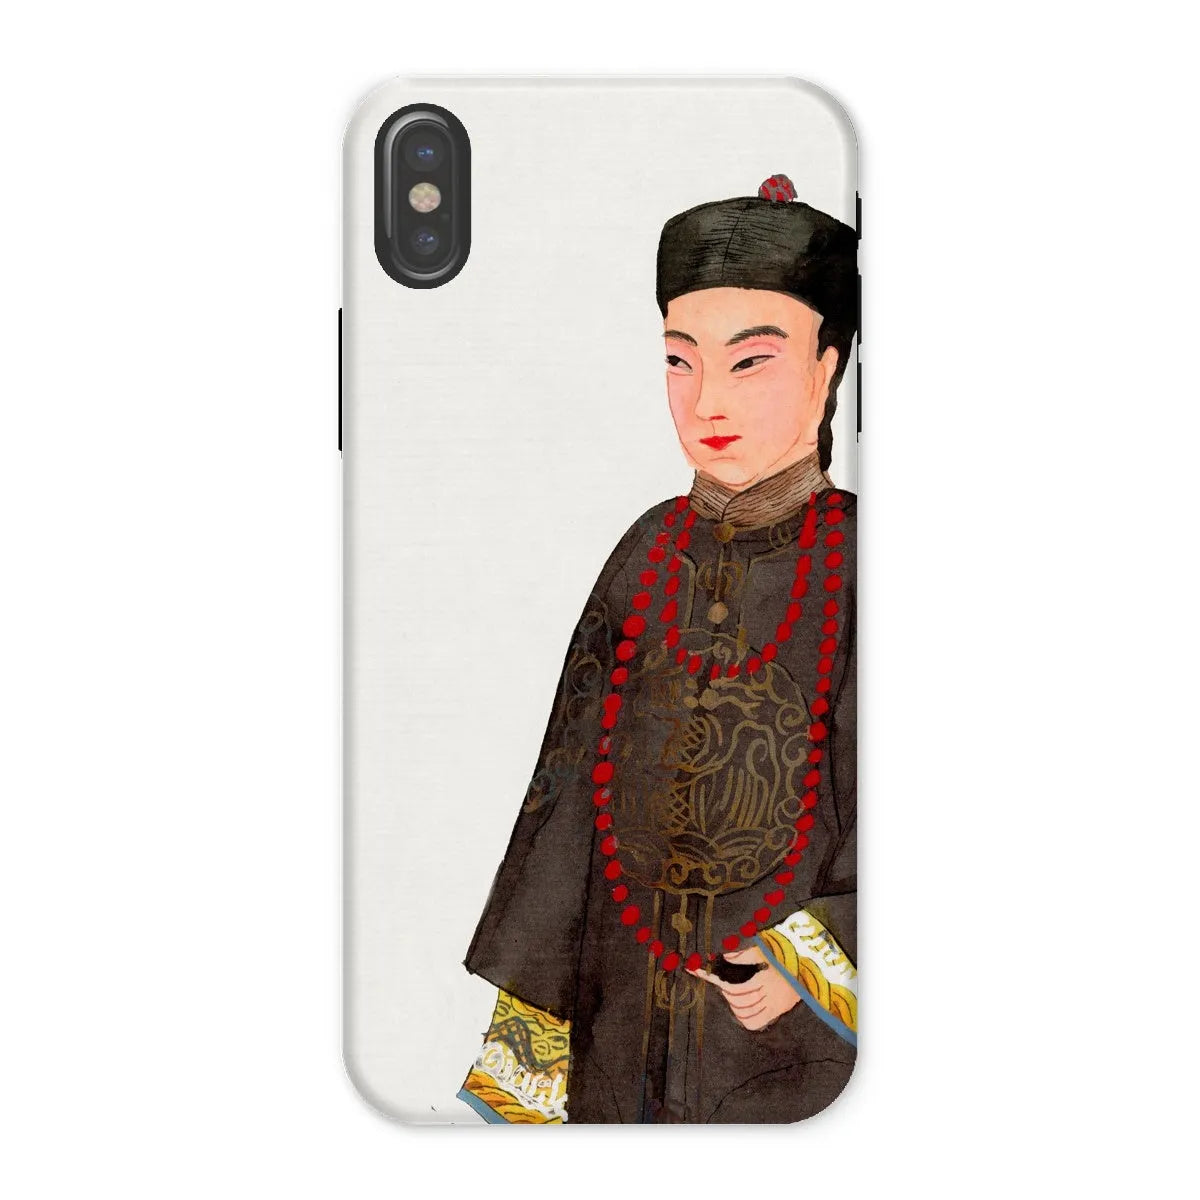 Emperor’s Courtier - Chinese Manchu Aesthetic Art Phone Case - Iphone x / Matte - Mobile Phone Cases - Aesthetic Art